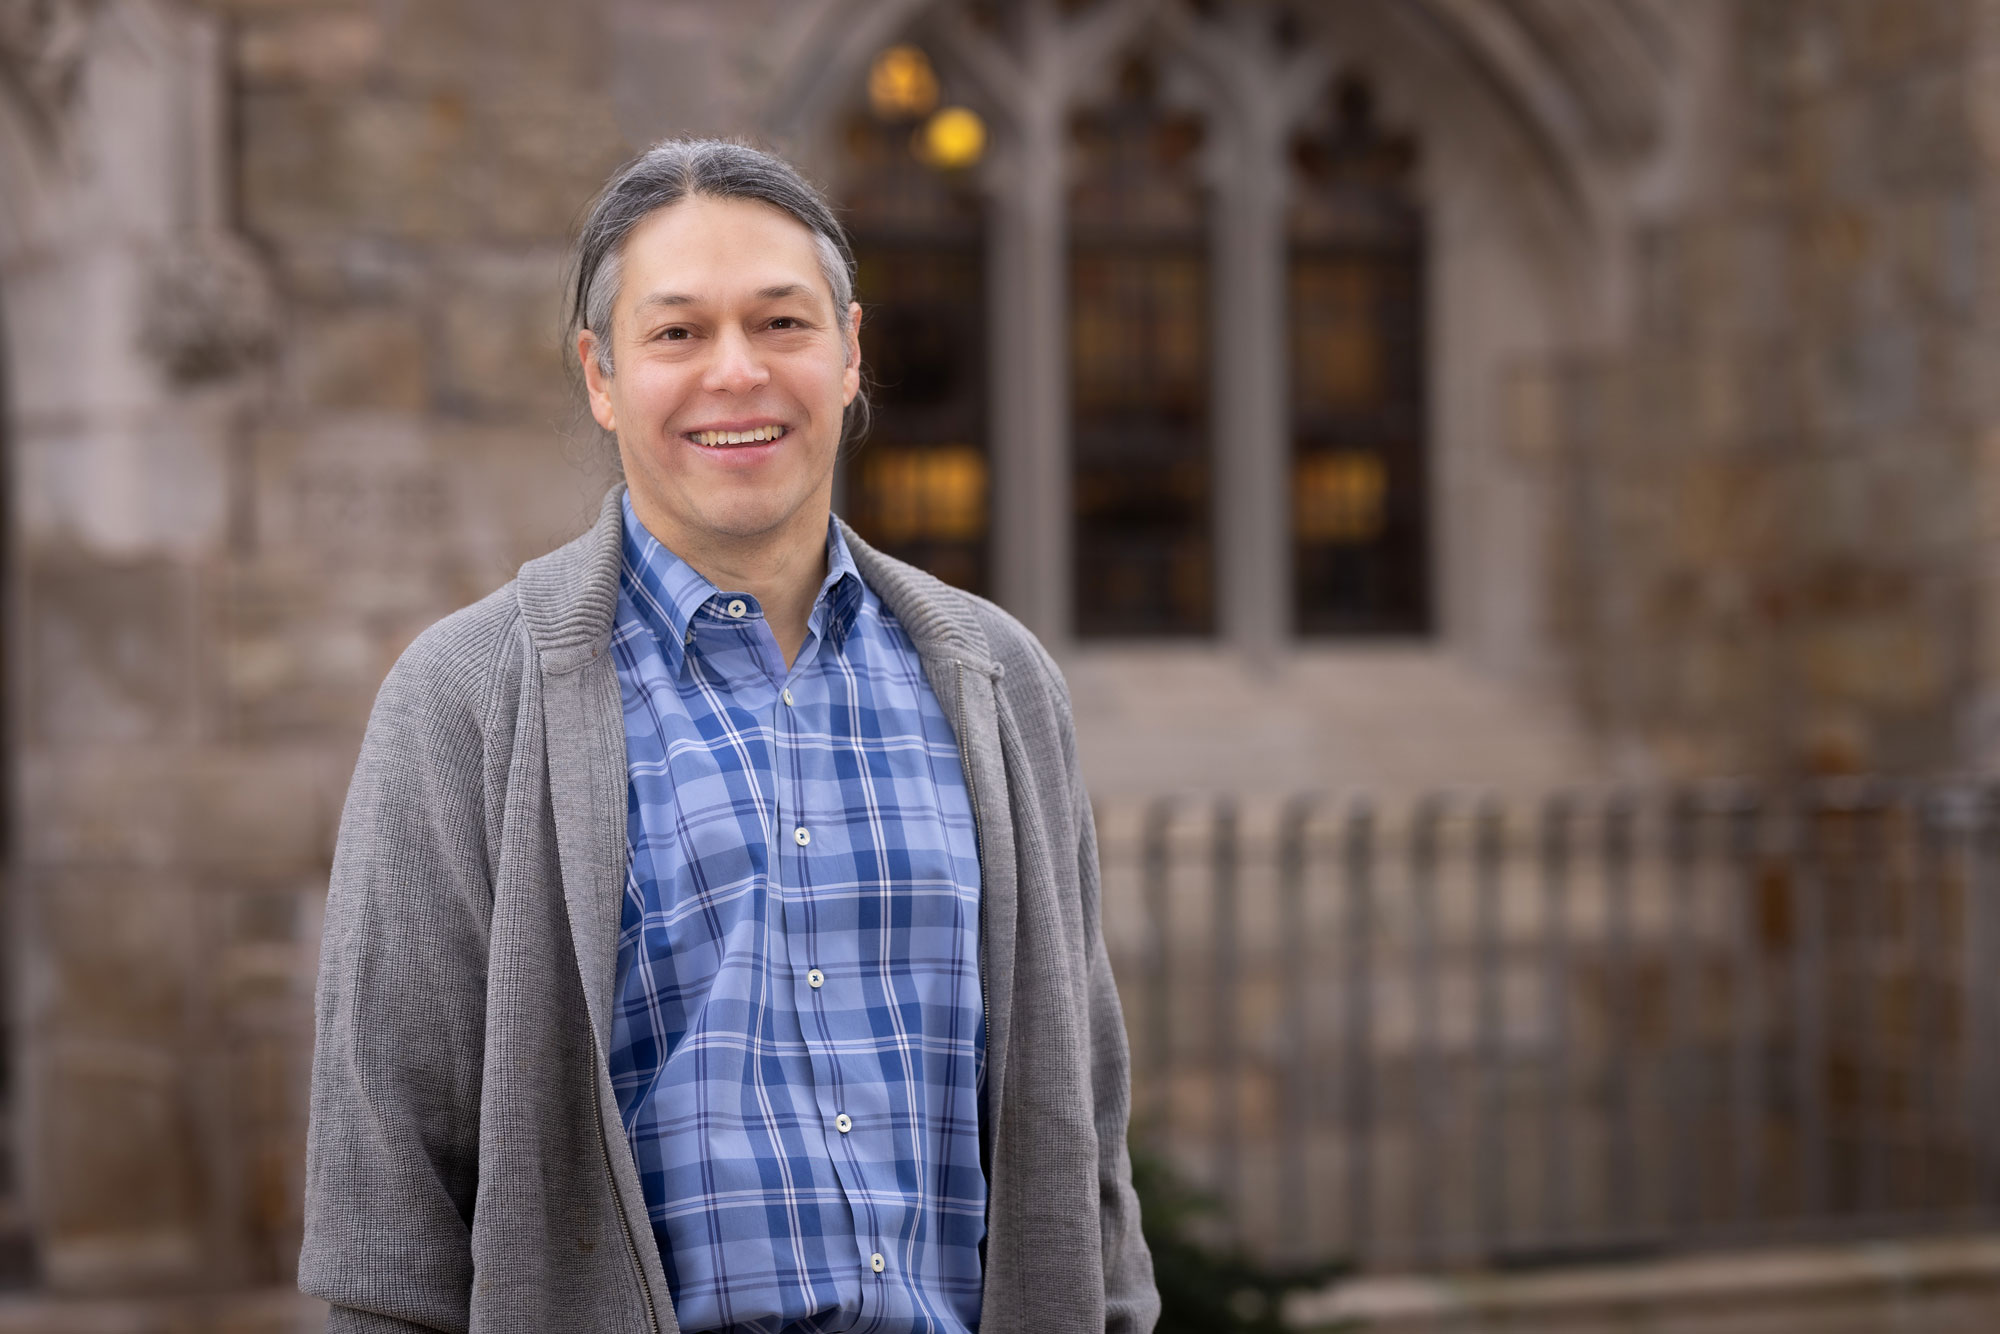 A man in a grey cardigan and blue button down shirt smiles in front of an academic building.